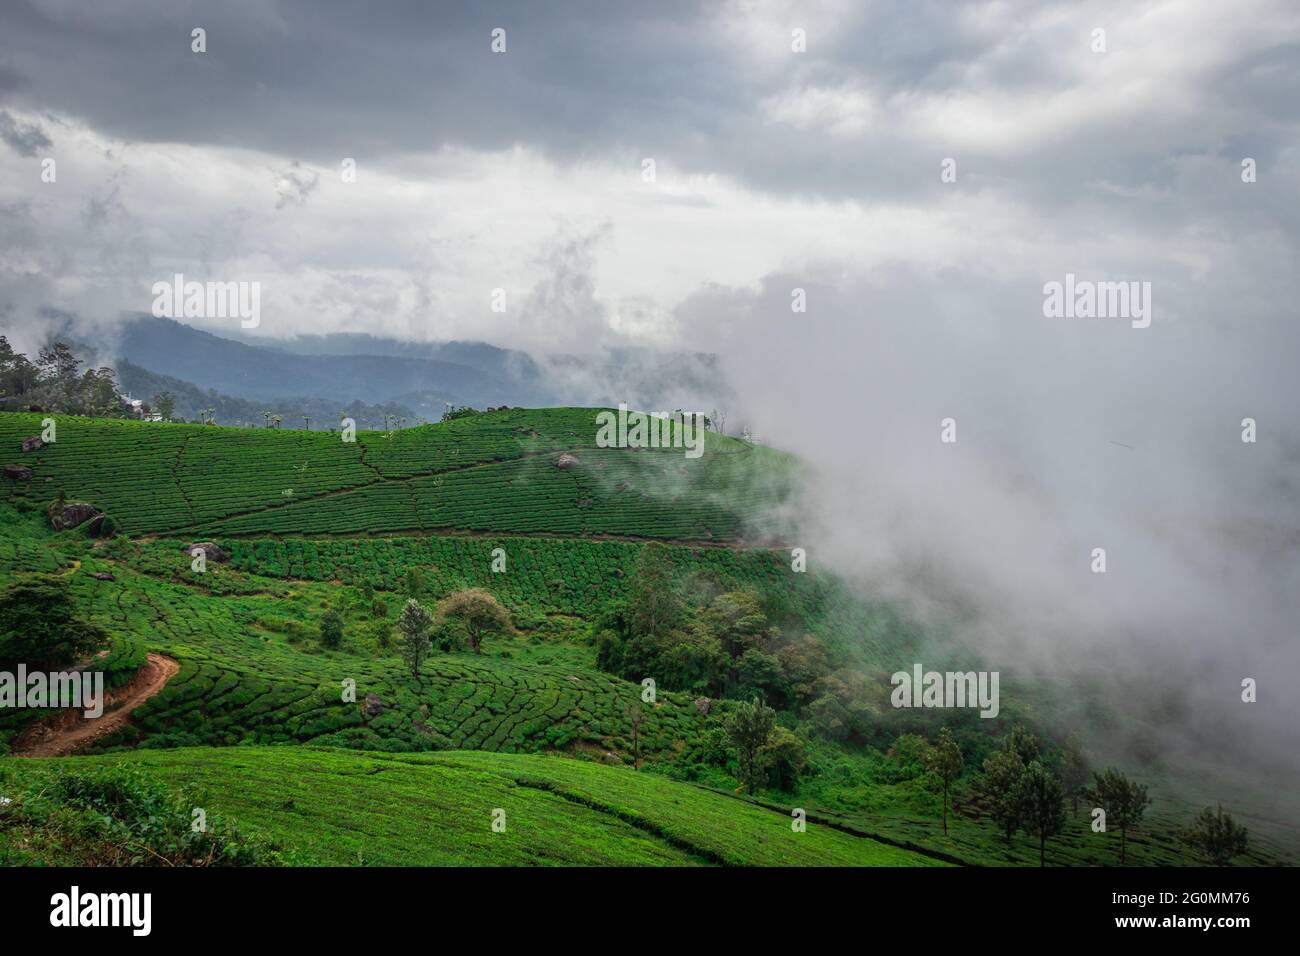 Tea gardens with misty mountains of western ghat image take at India. The landscape is amazing with Green tea plantations in rows. Stock Photo